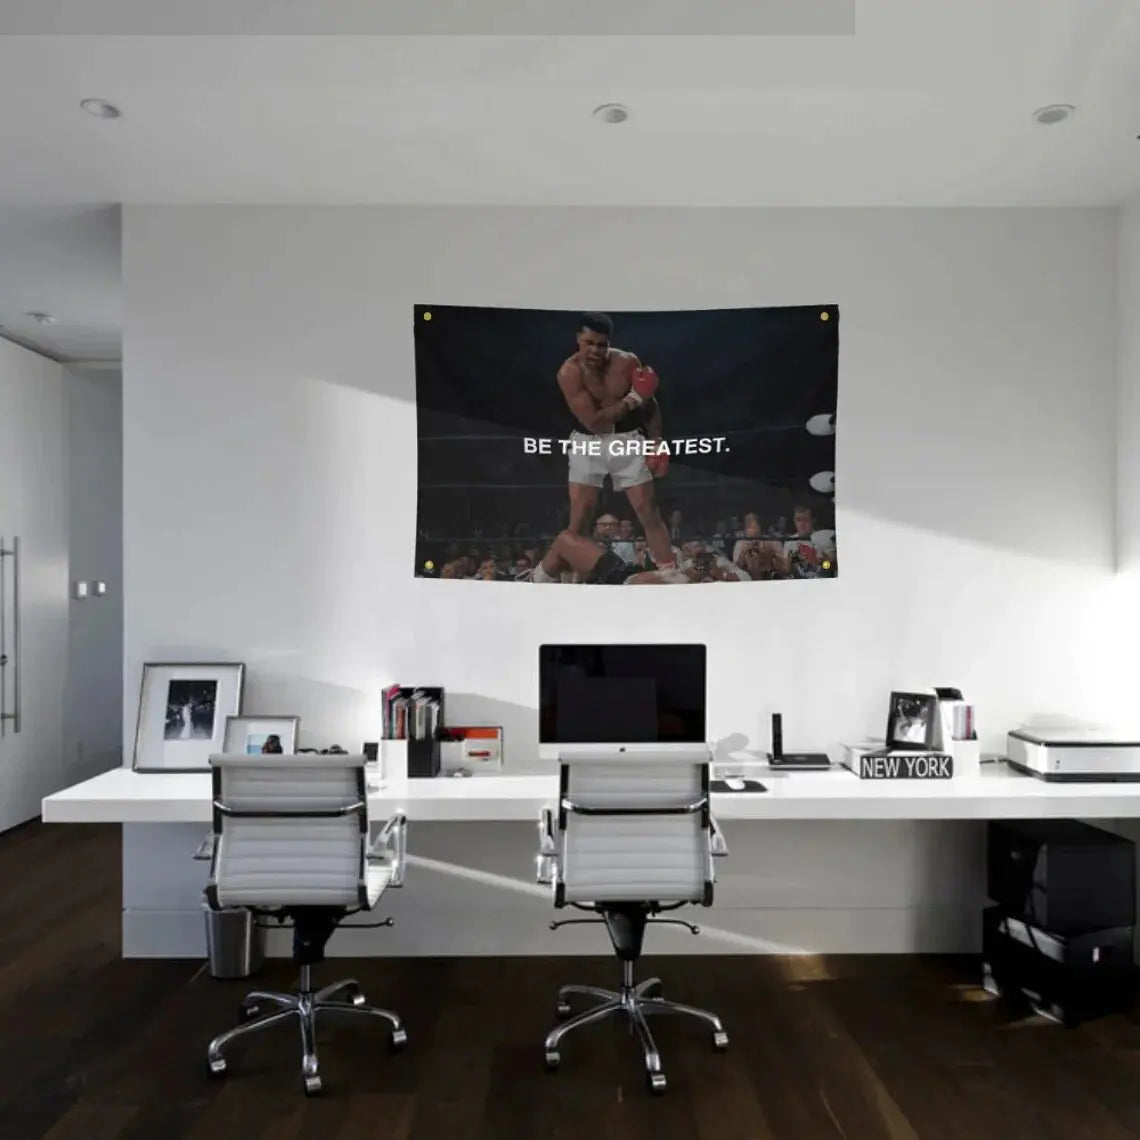 Motivational boxing gym flag featuring a portrait of Muhammad Ali. Perfect for inspiring athletes and creating a champion's training atmosphere.Motivational boxing gym flag featuring a portrait of Muhammad Ali. Perfect for inspiring athletes and creating a champion's training atmosphere.